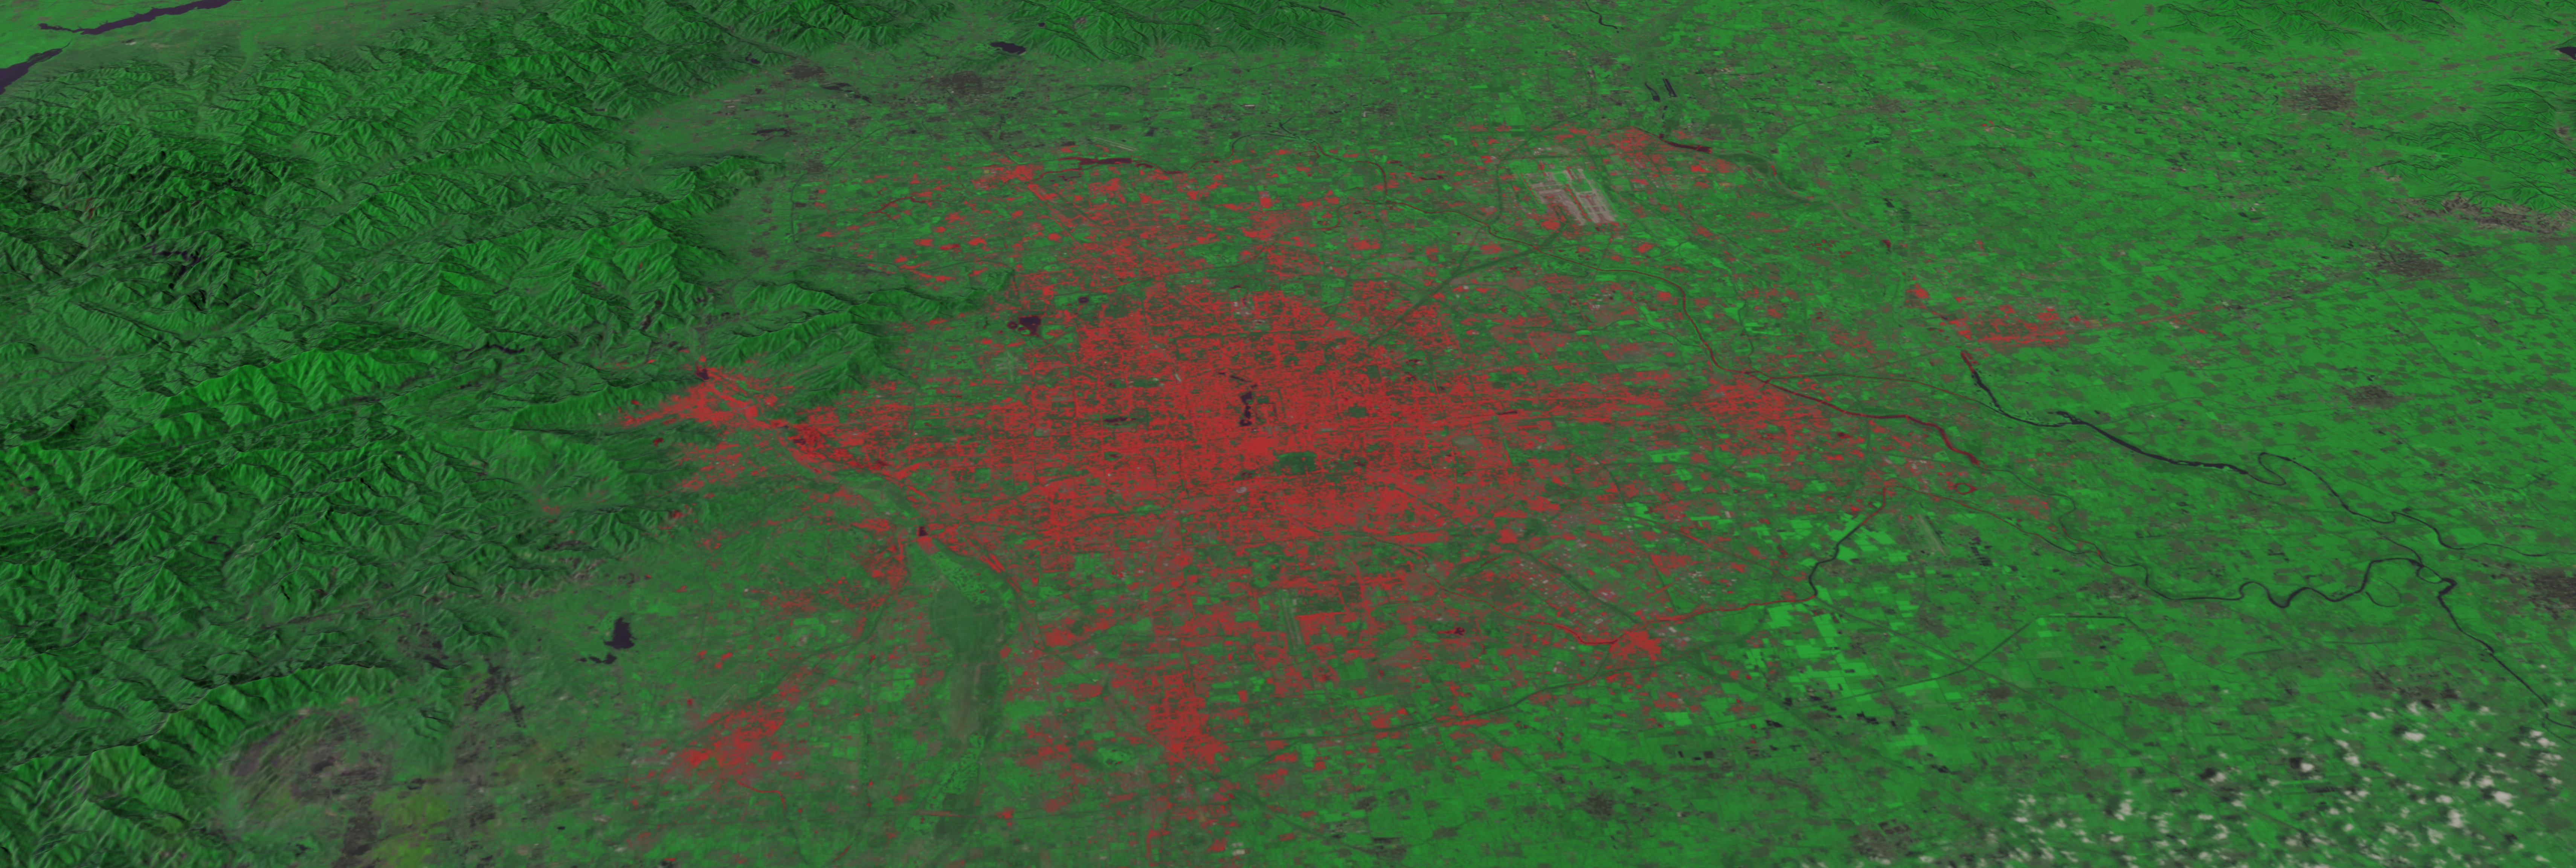 Animation zooming down to Beijing, China in 1978 via Landsat-3. The data then dissolves to Beijing in 2010 through the sensors of Landsat-5. The red areas are non-vegetated urban areas. 